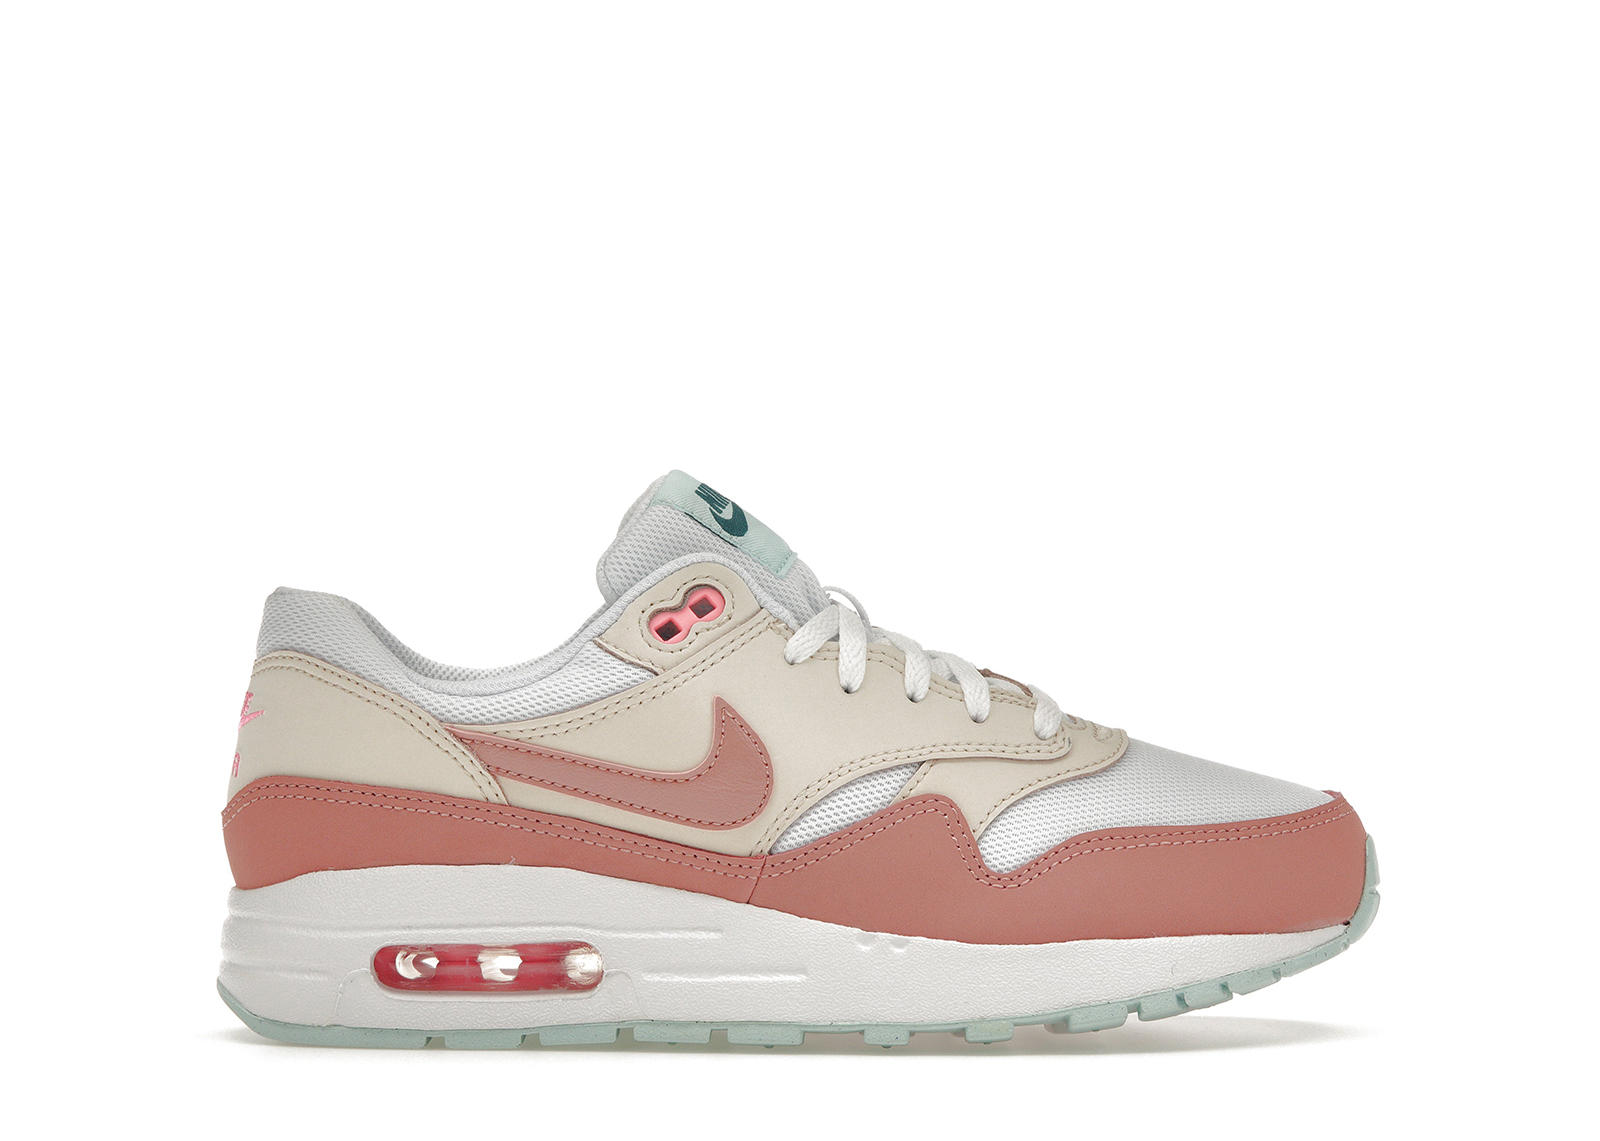 Nike Air Max 1 Red Stardust Guava Ice (GS) Kids' - DZ3307-101 - US